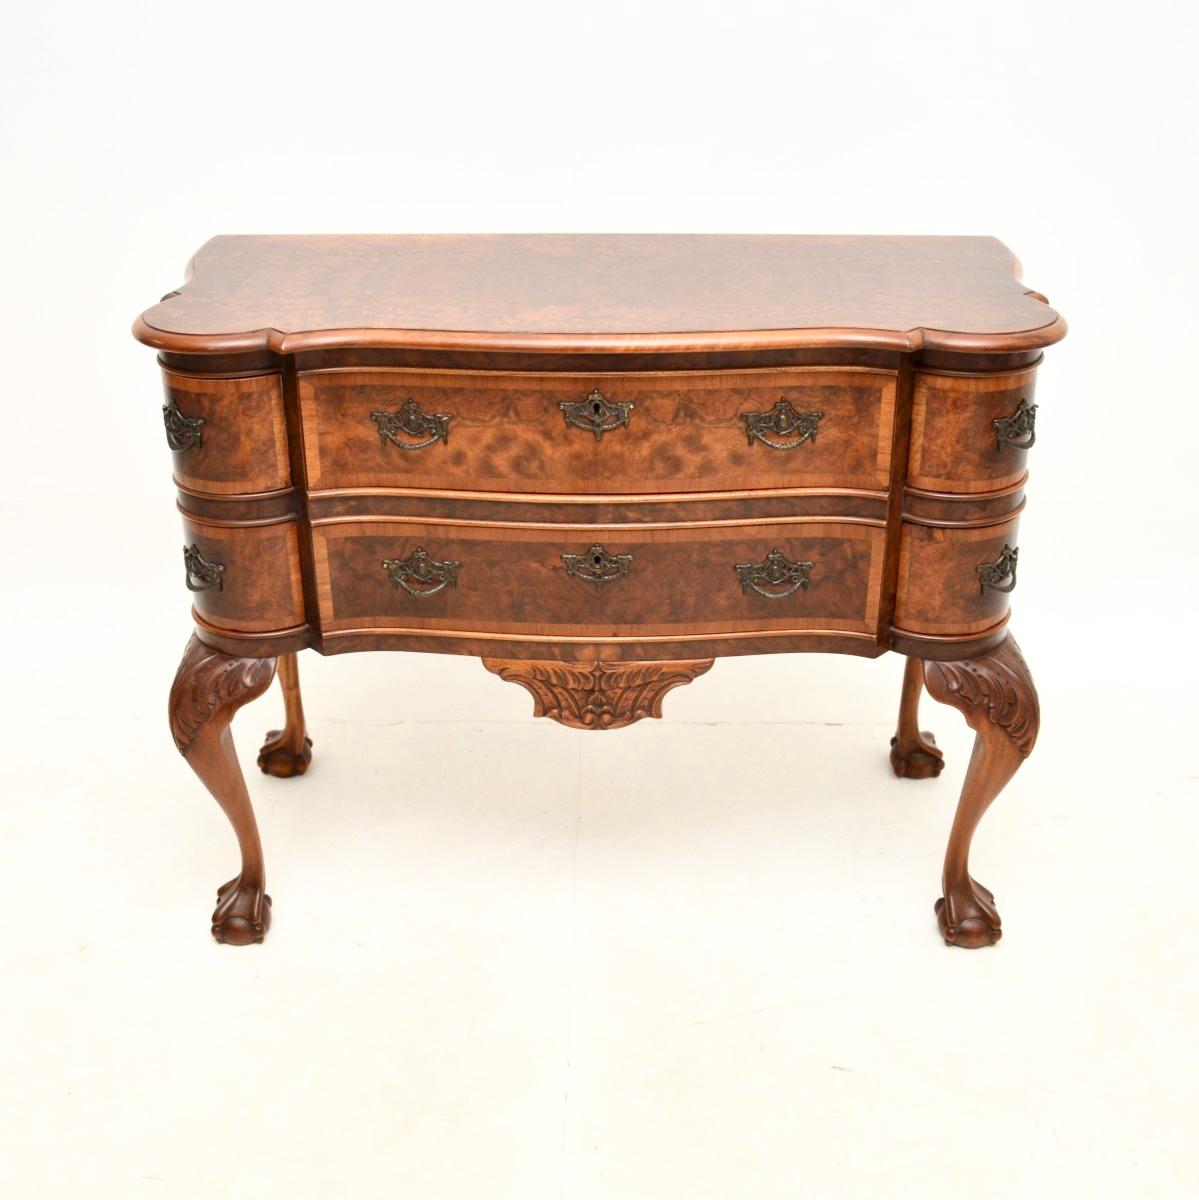 A stunning antique burr walnut lowboy chest of drawers. This was made in England, it is in the classic Queen Anne style and dates from around the 1920-30’s.

The quality is outstanding, this is beautifully made and is a very useful size, perfect for